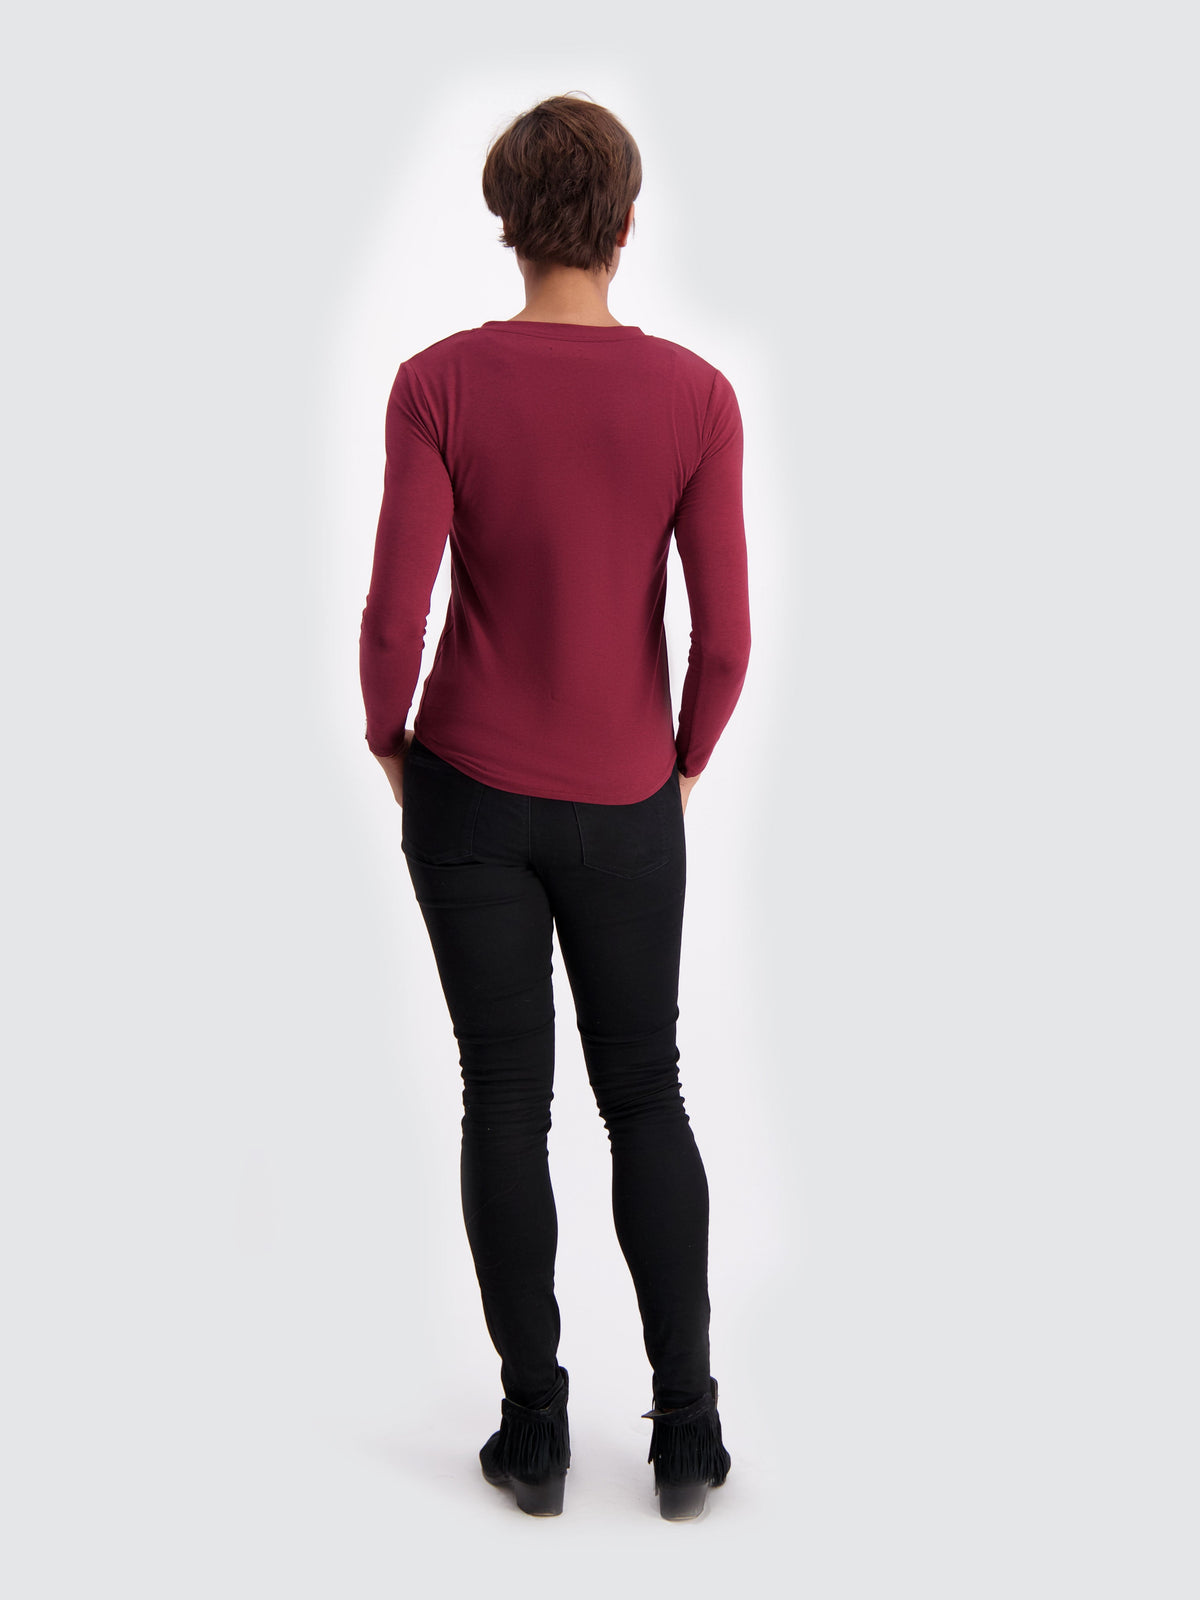 Two Blind Brothers - Womens Women's LS Relaxed Fit Henley Plum